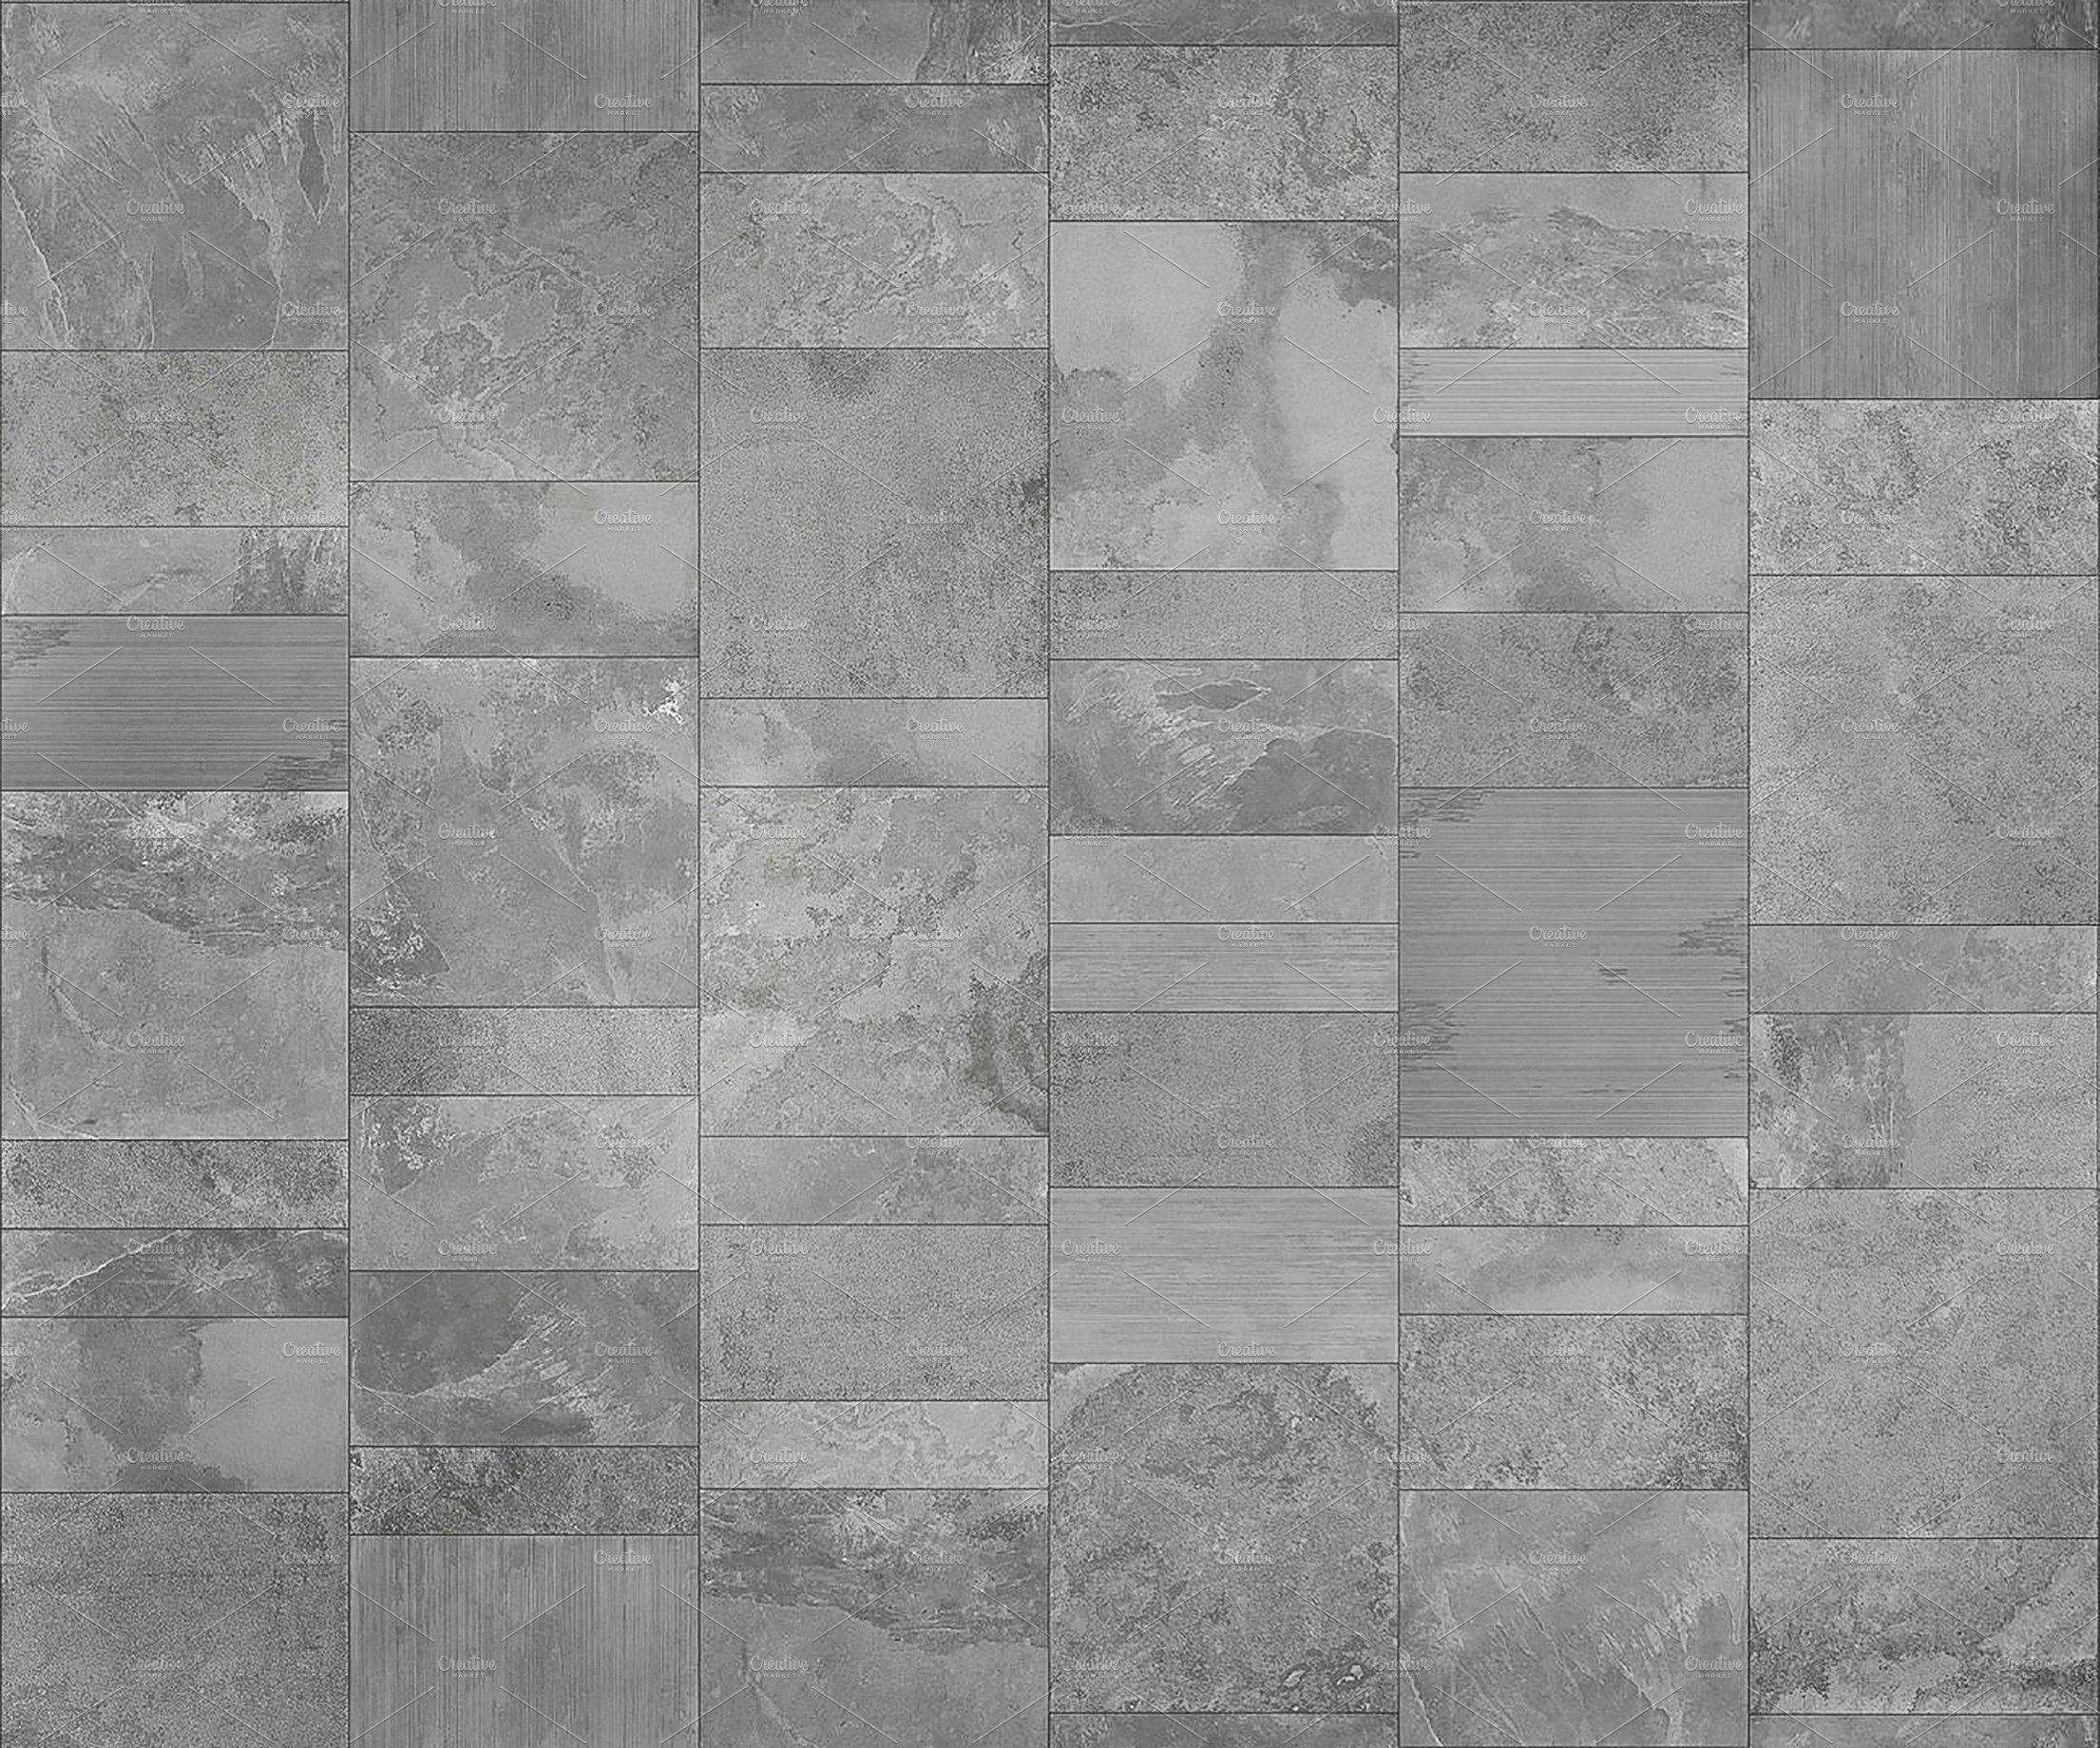 Slate tile texture cover image.